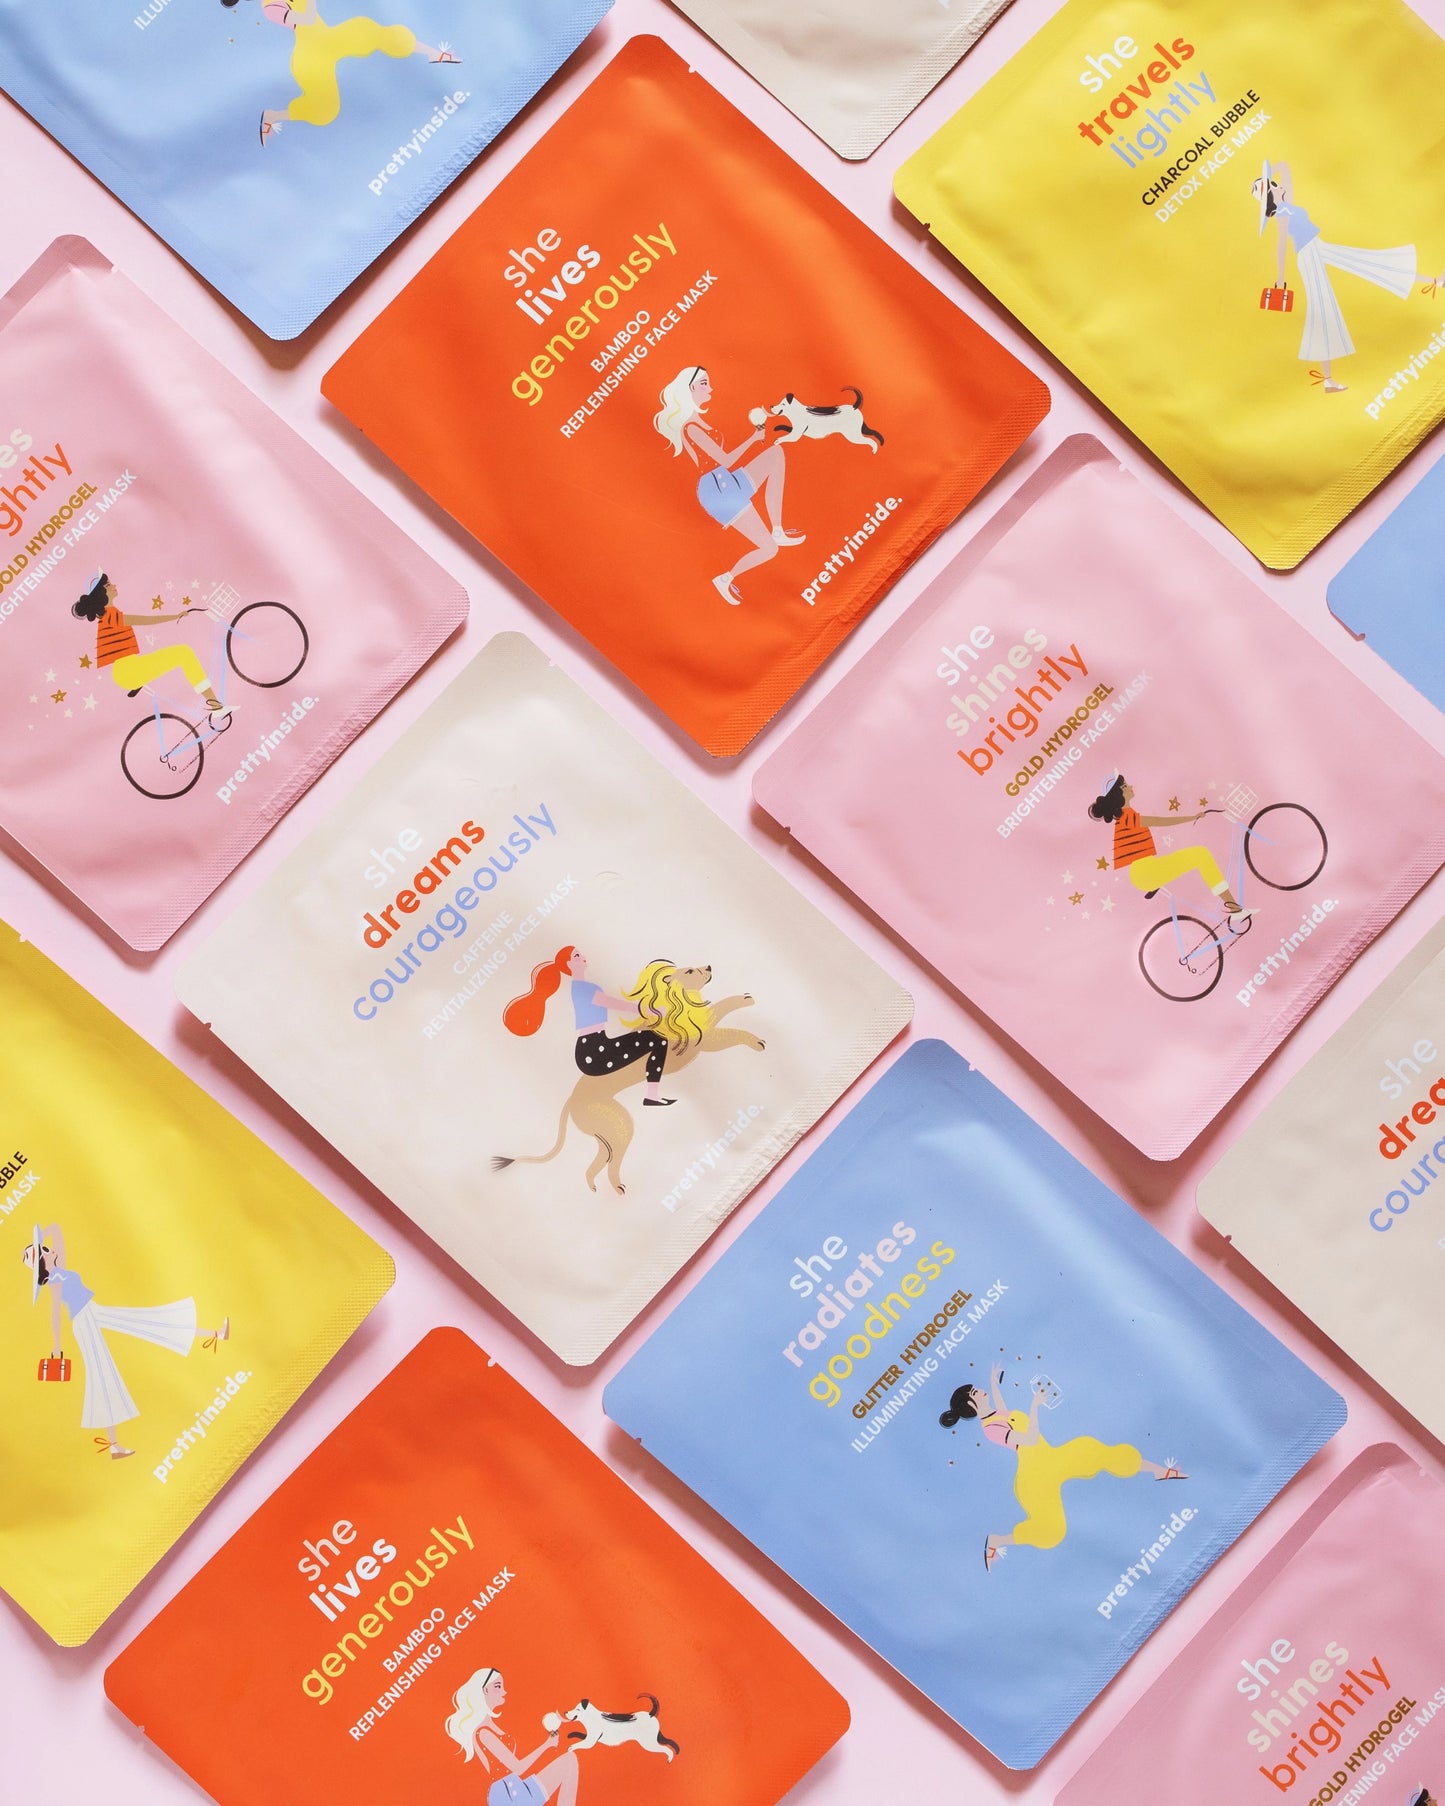 Musee x Prettyinside Variety Pack of Face Masks